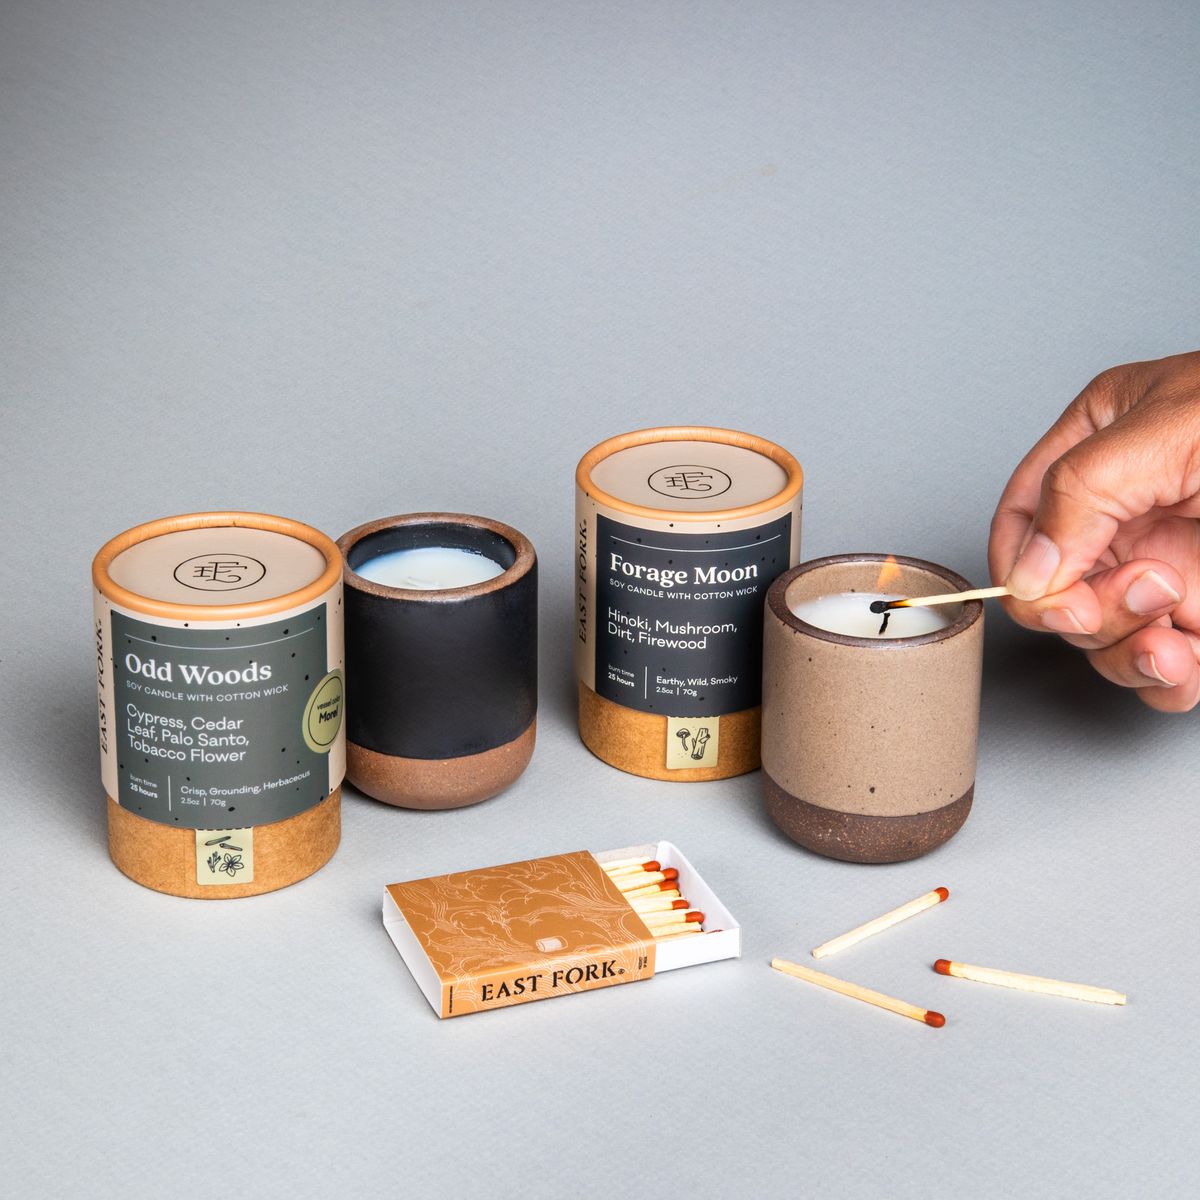 Two small ceramic vessels in dark charcoal and warm pale brown colors with candles inside each are gathered next to their cardboard packaging tubes with matches. A hand is lighting the warm brown candle.